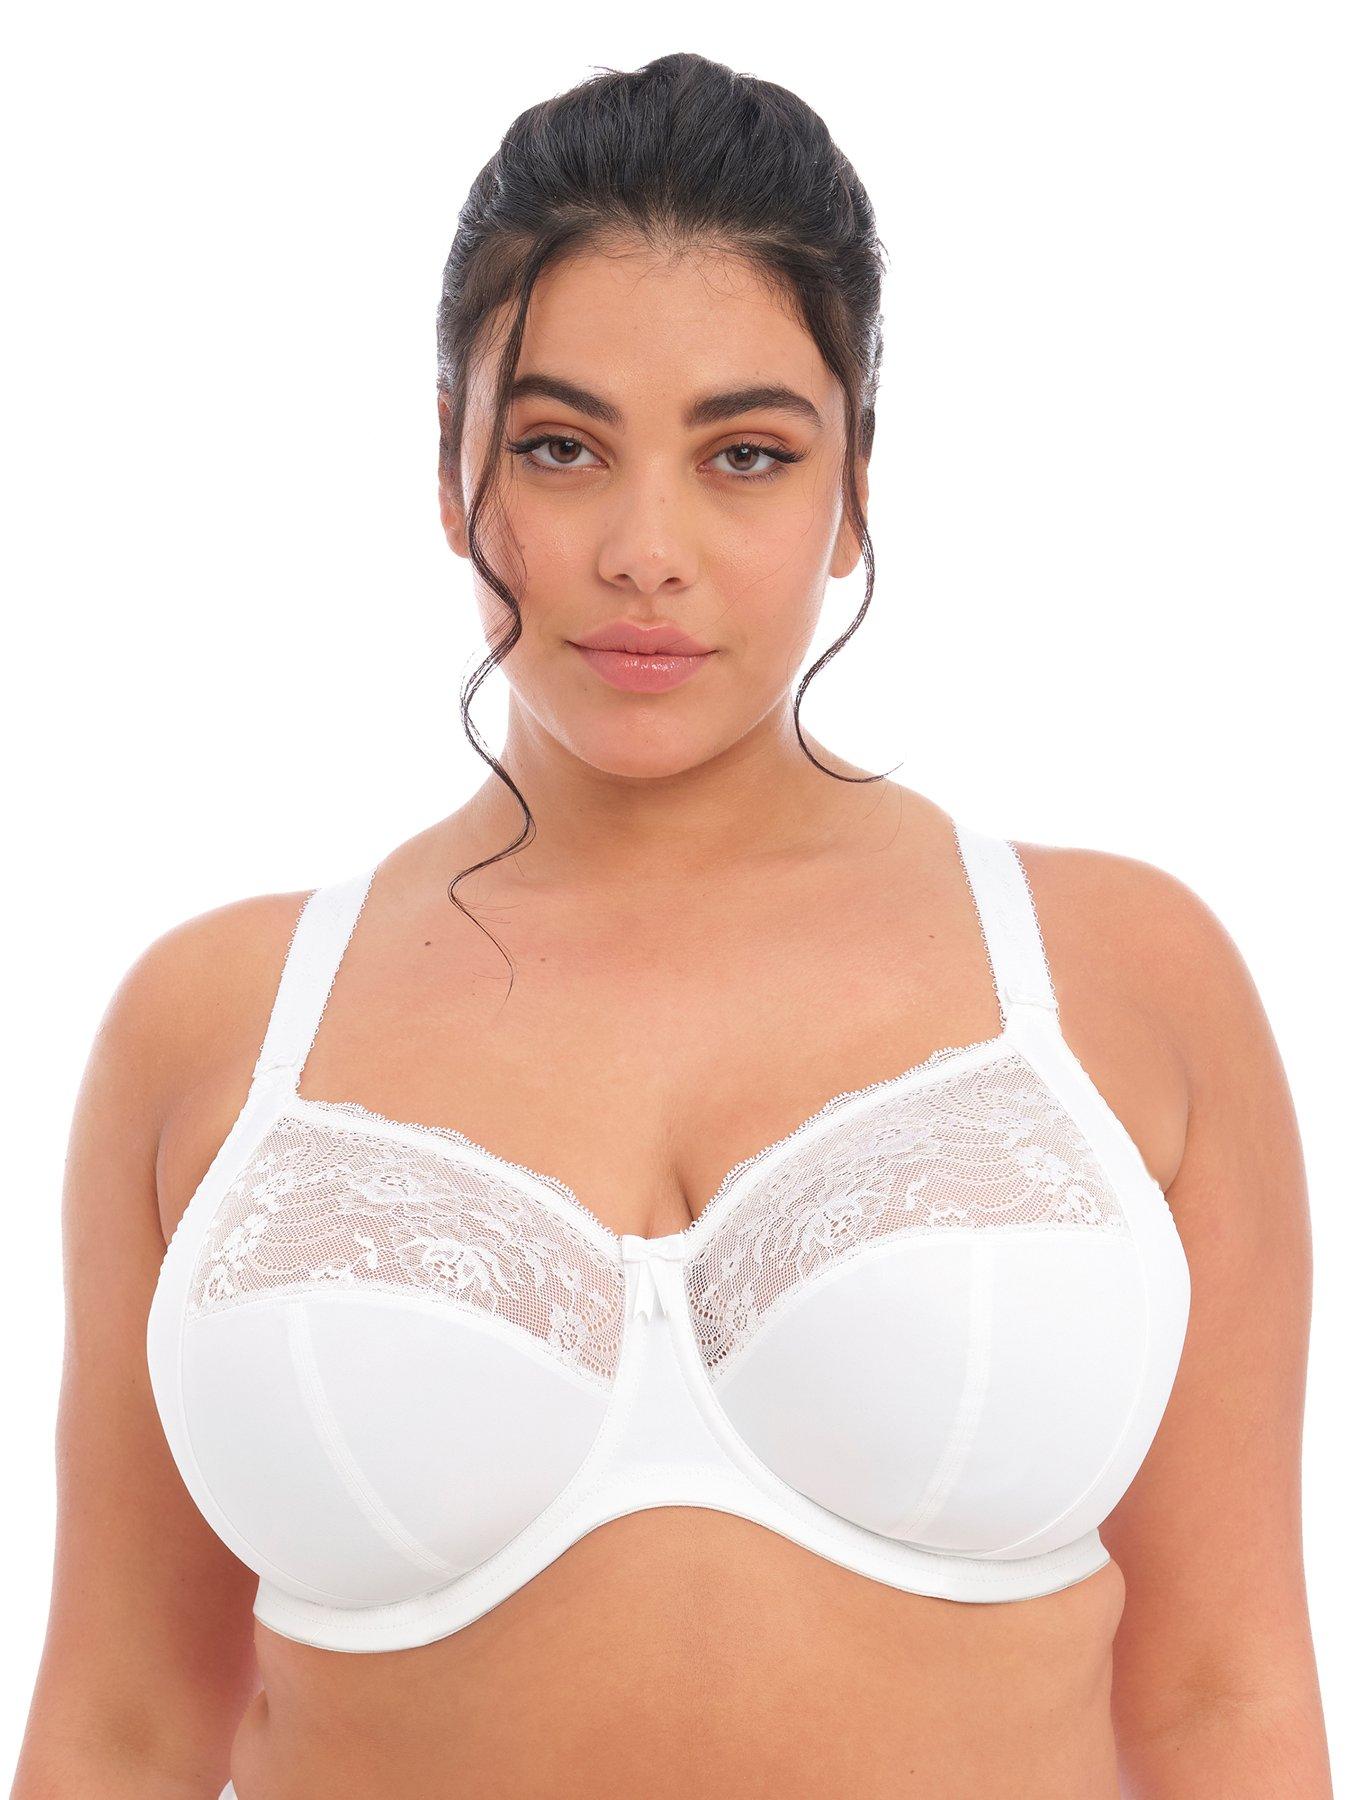 On Sale Almost U Style 1400 Wide Band Bra, Lacy Bras